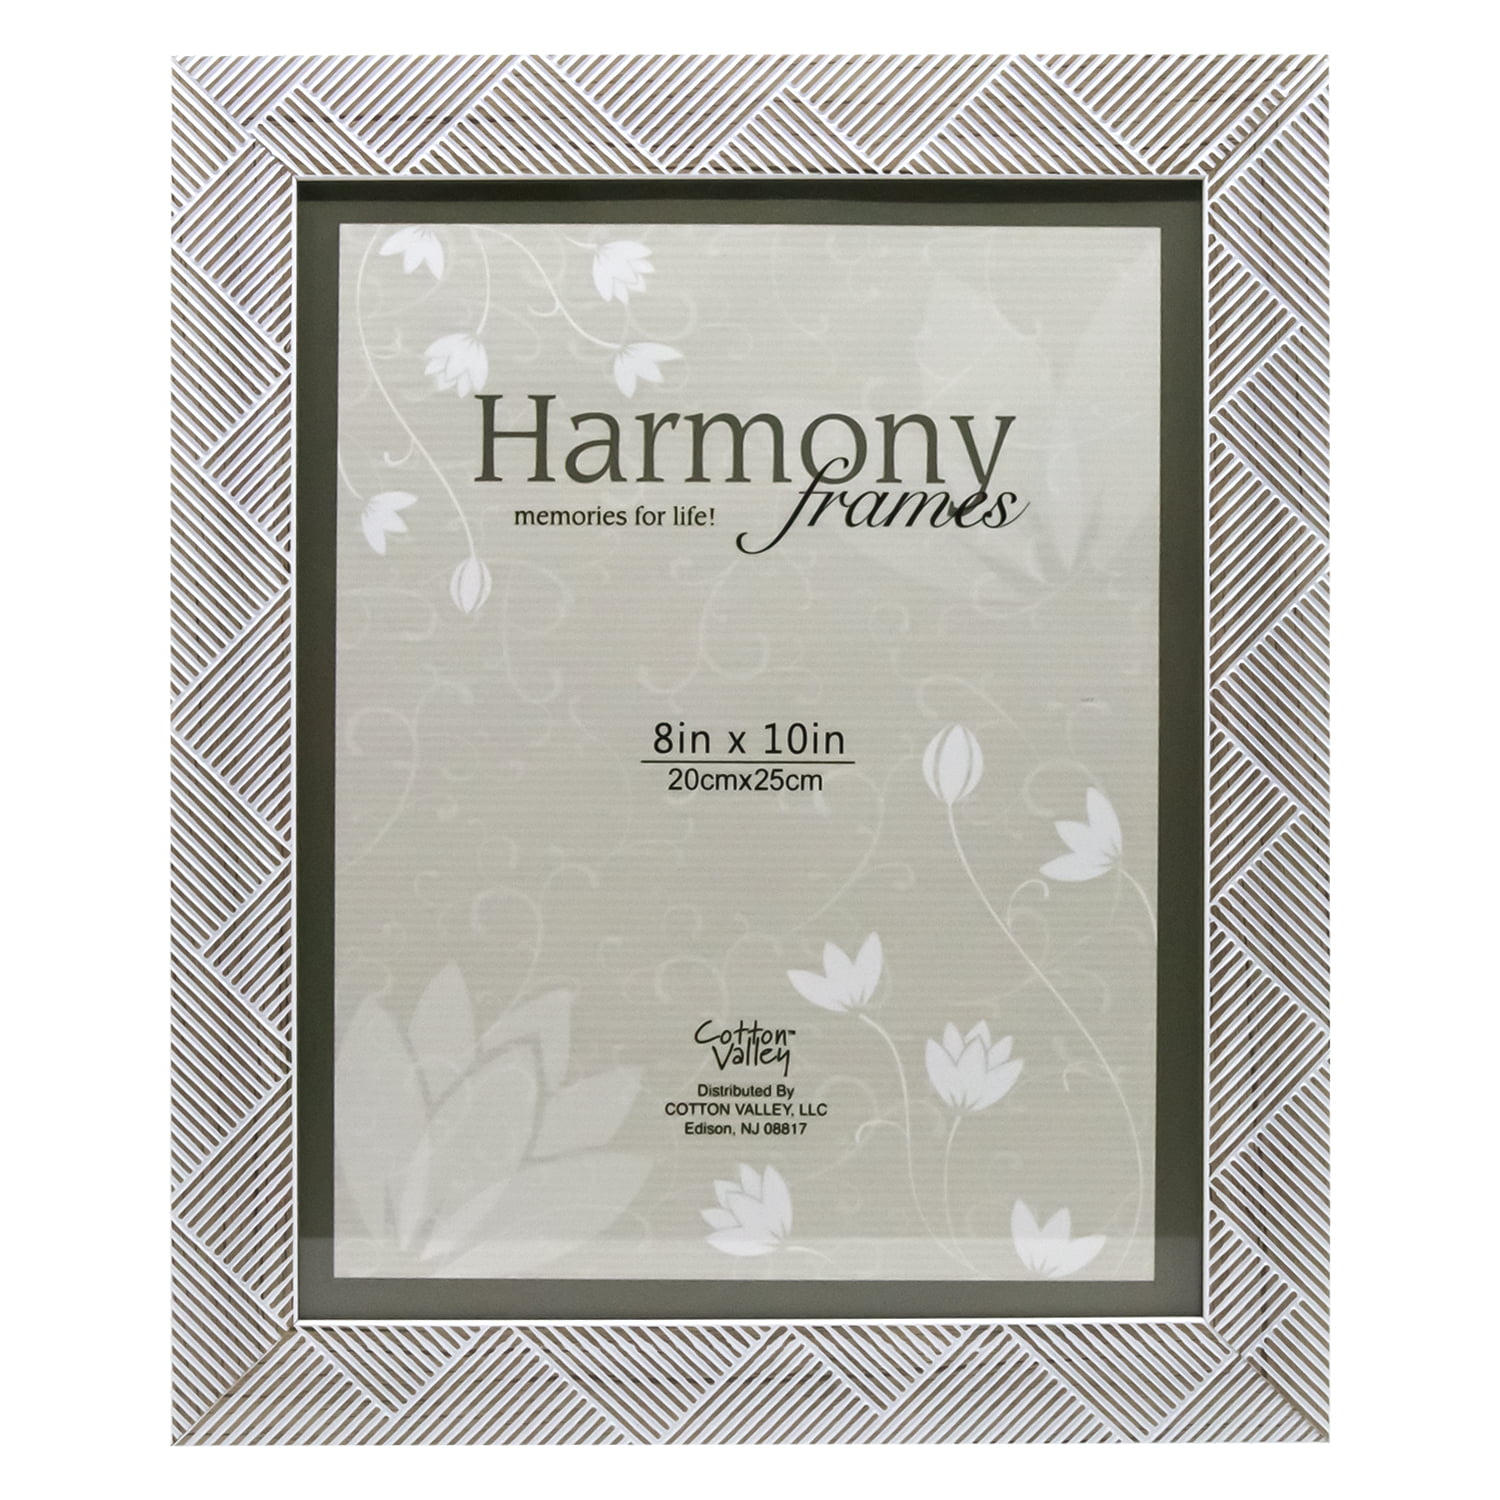 You Are so Cute 4x6 Frame for sale online Disney Gifts Bambi 